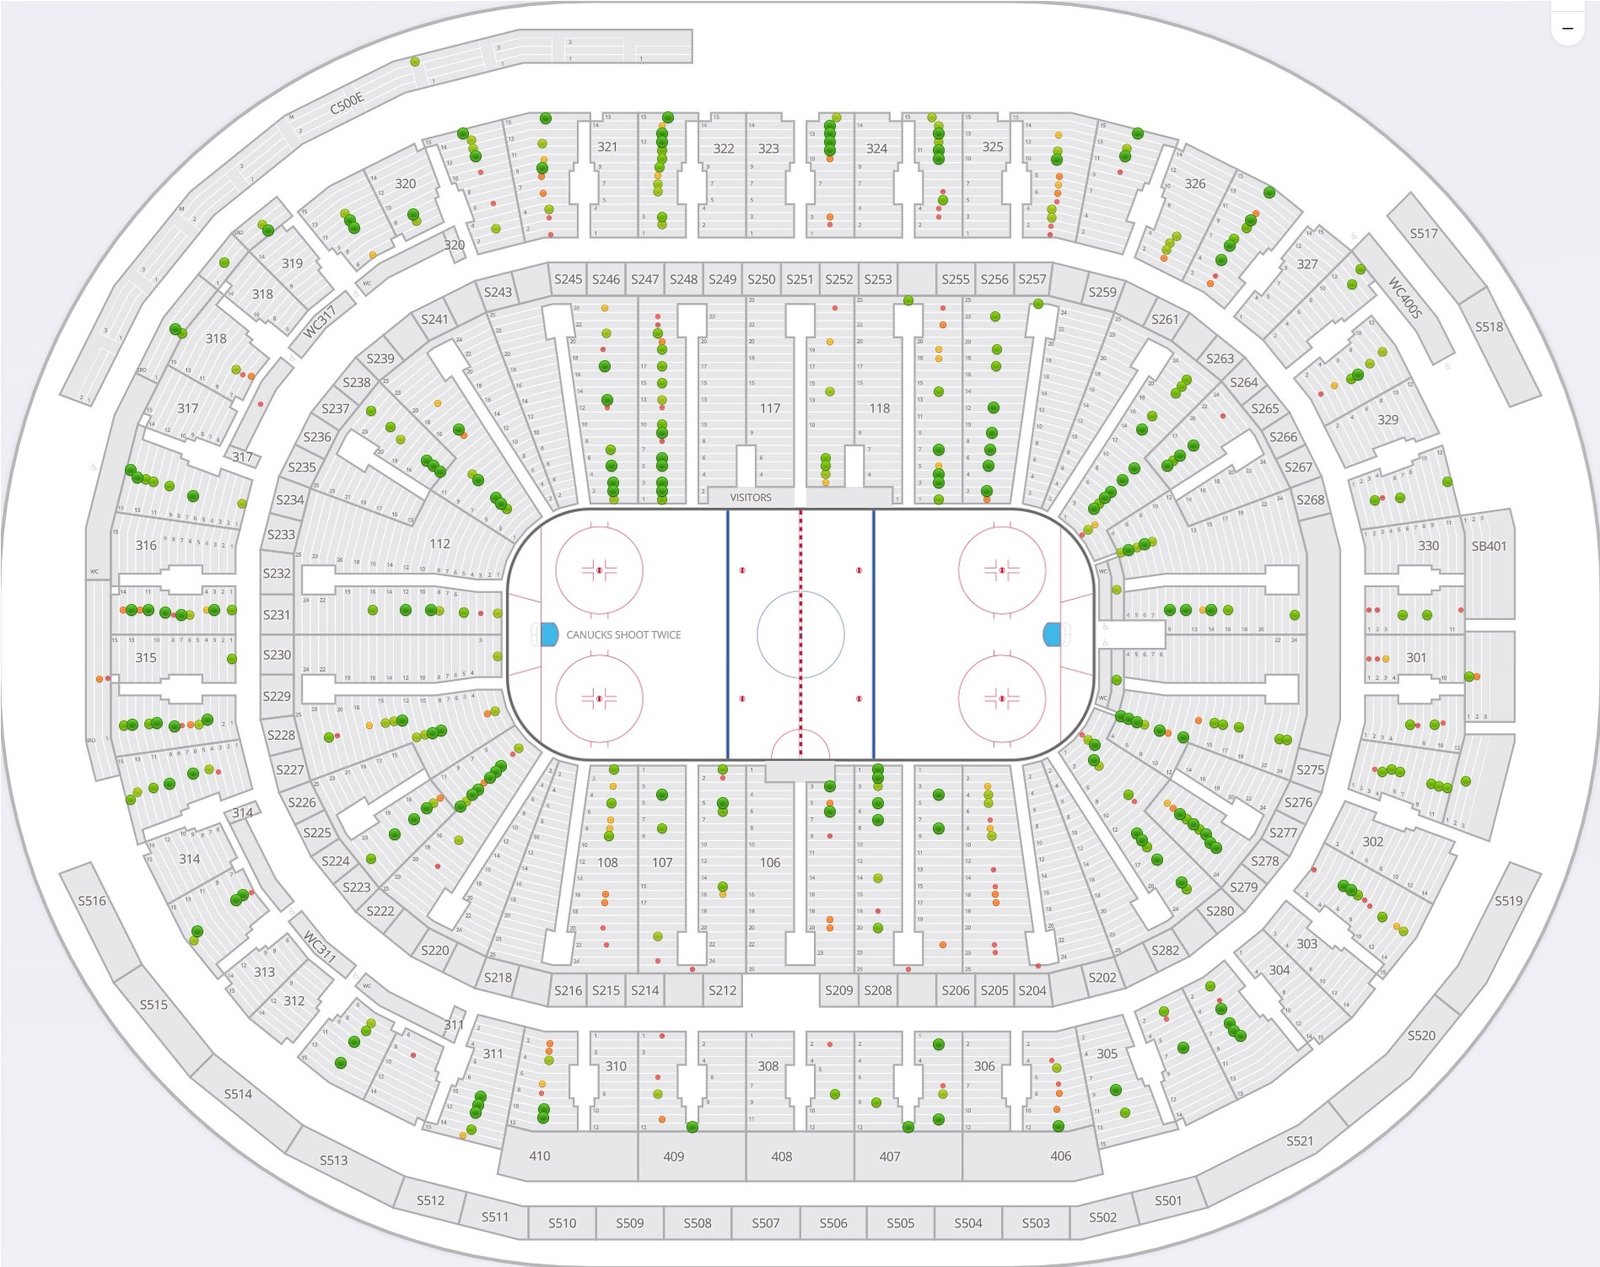 Rogers Arena Seating Chart with Seat Numbers and Rows